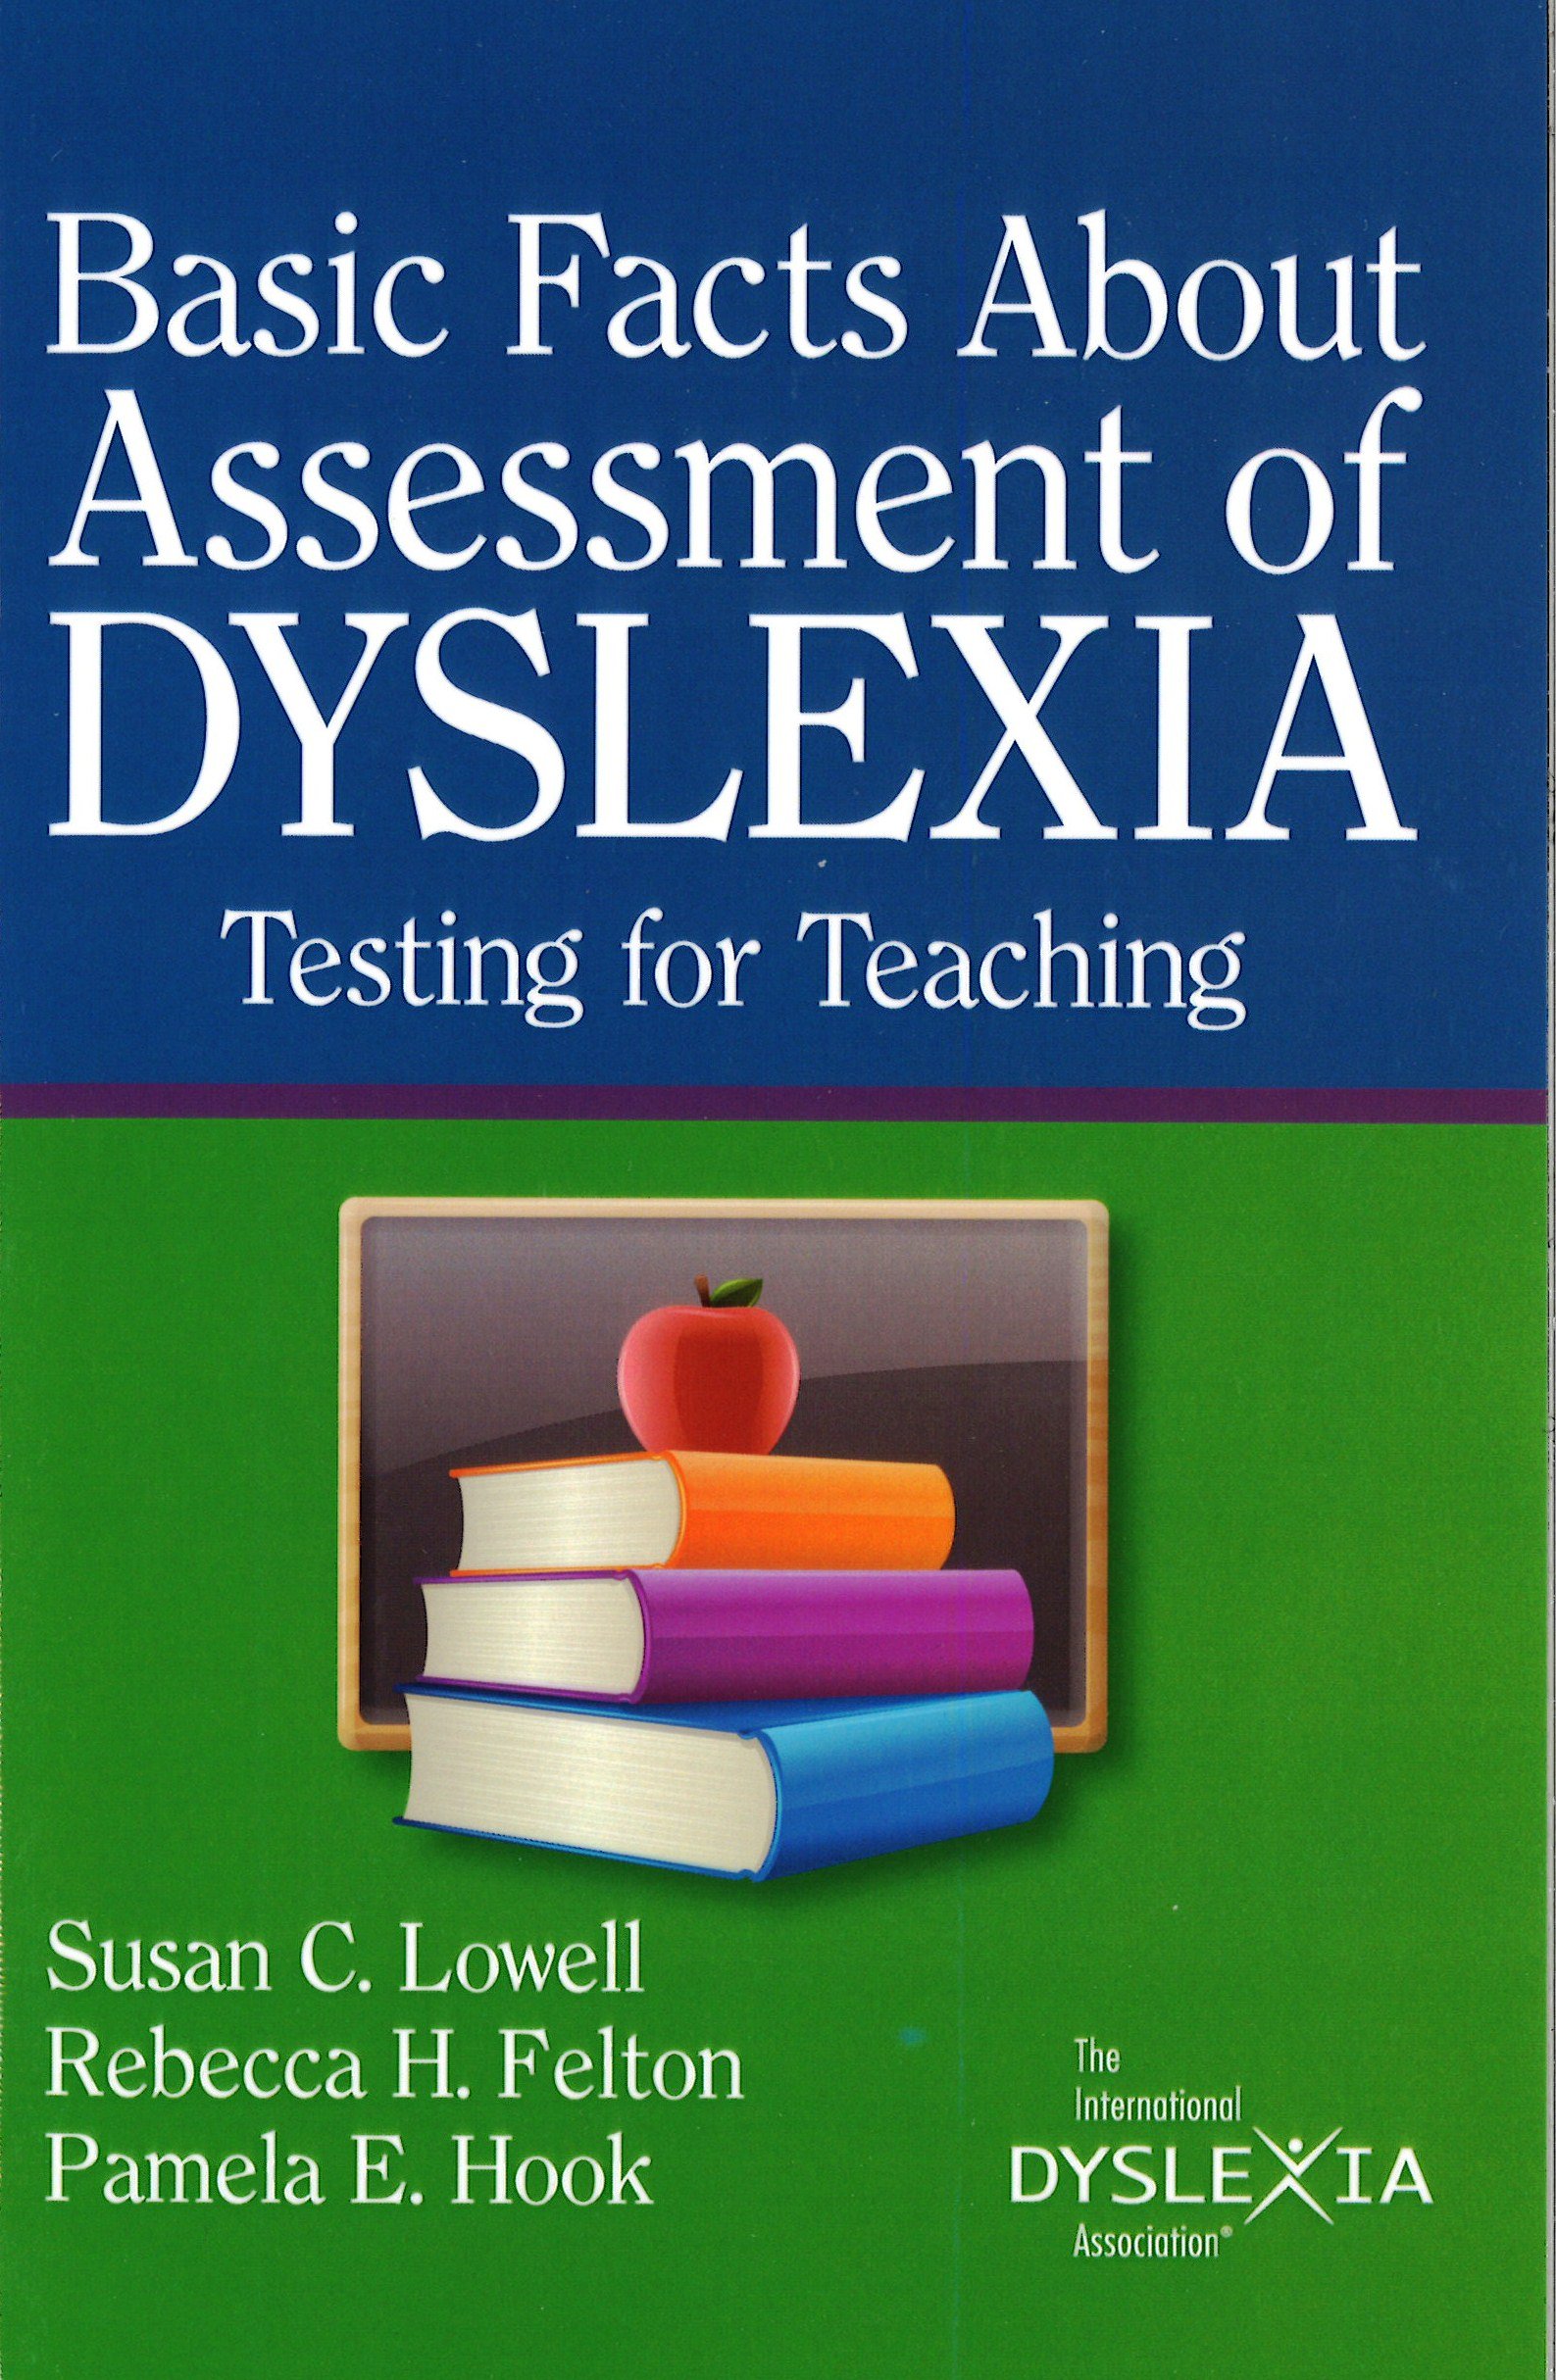 Basic Facts About Assess of Dyslexia